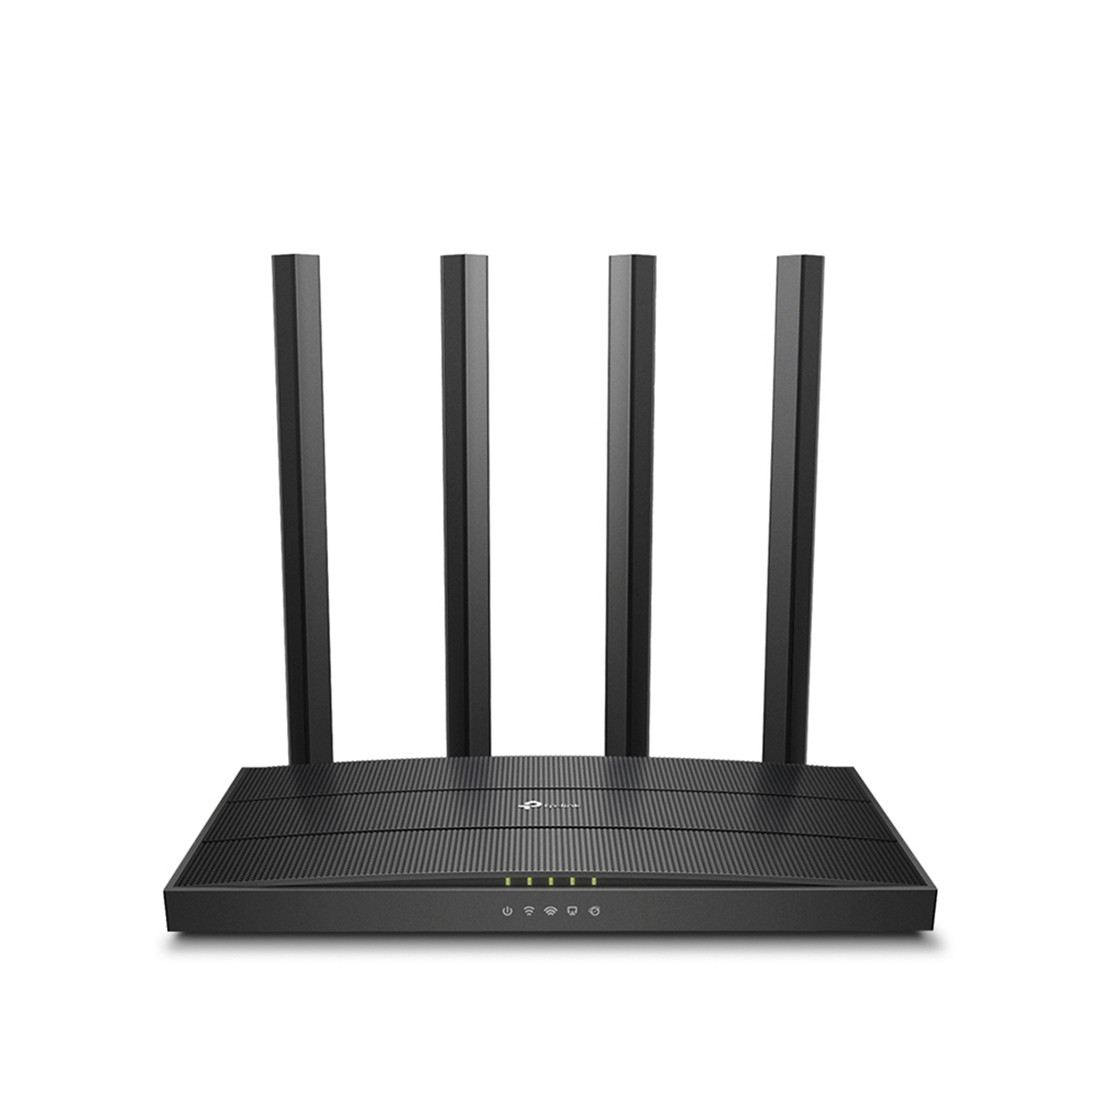 Маршрутизатор TP-Link Archer A6 (Маршрутизаторы) - фото 1 - id-p115007606